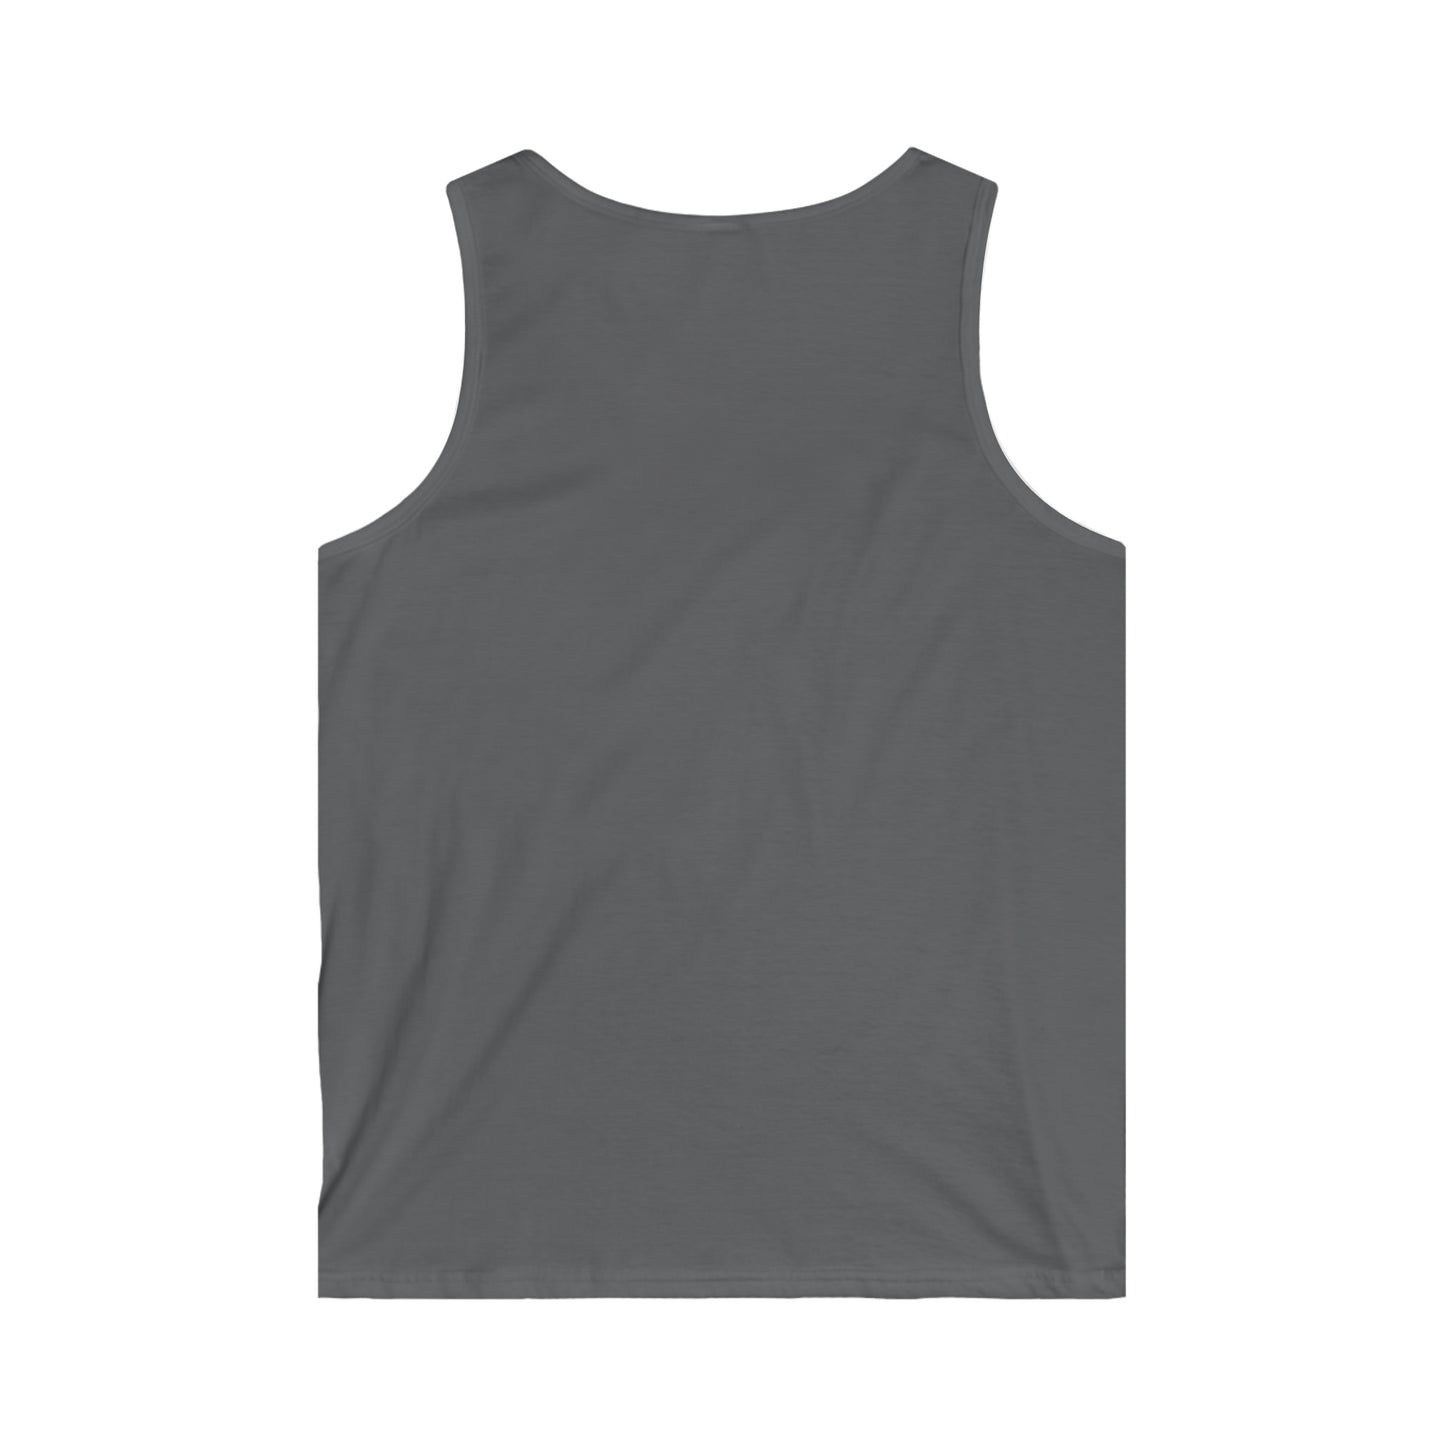 Of All the Paths AT - Men's Tank Top